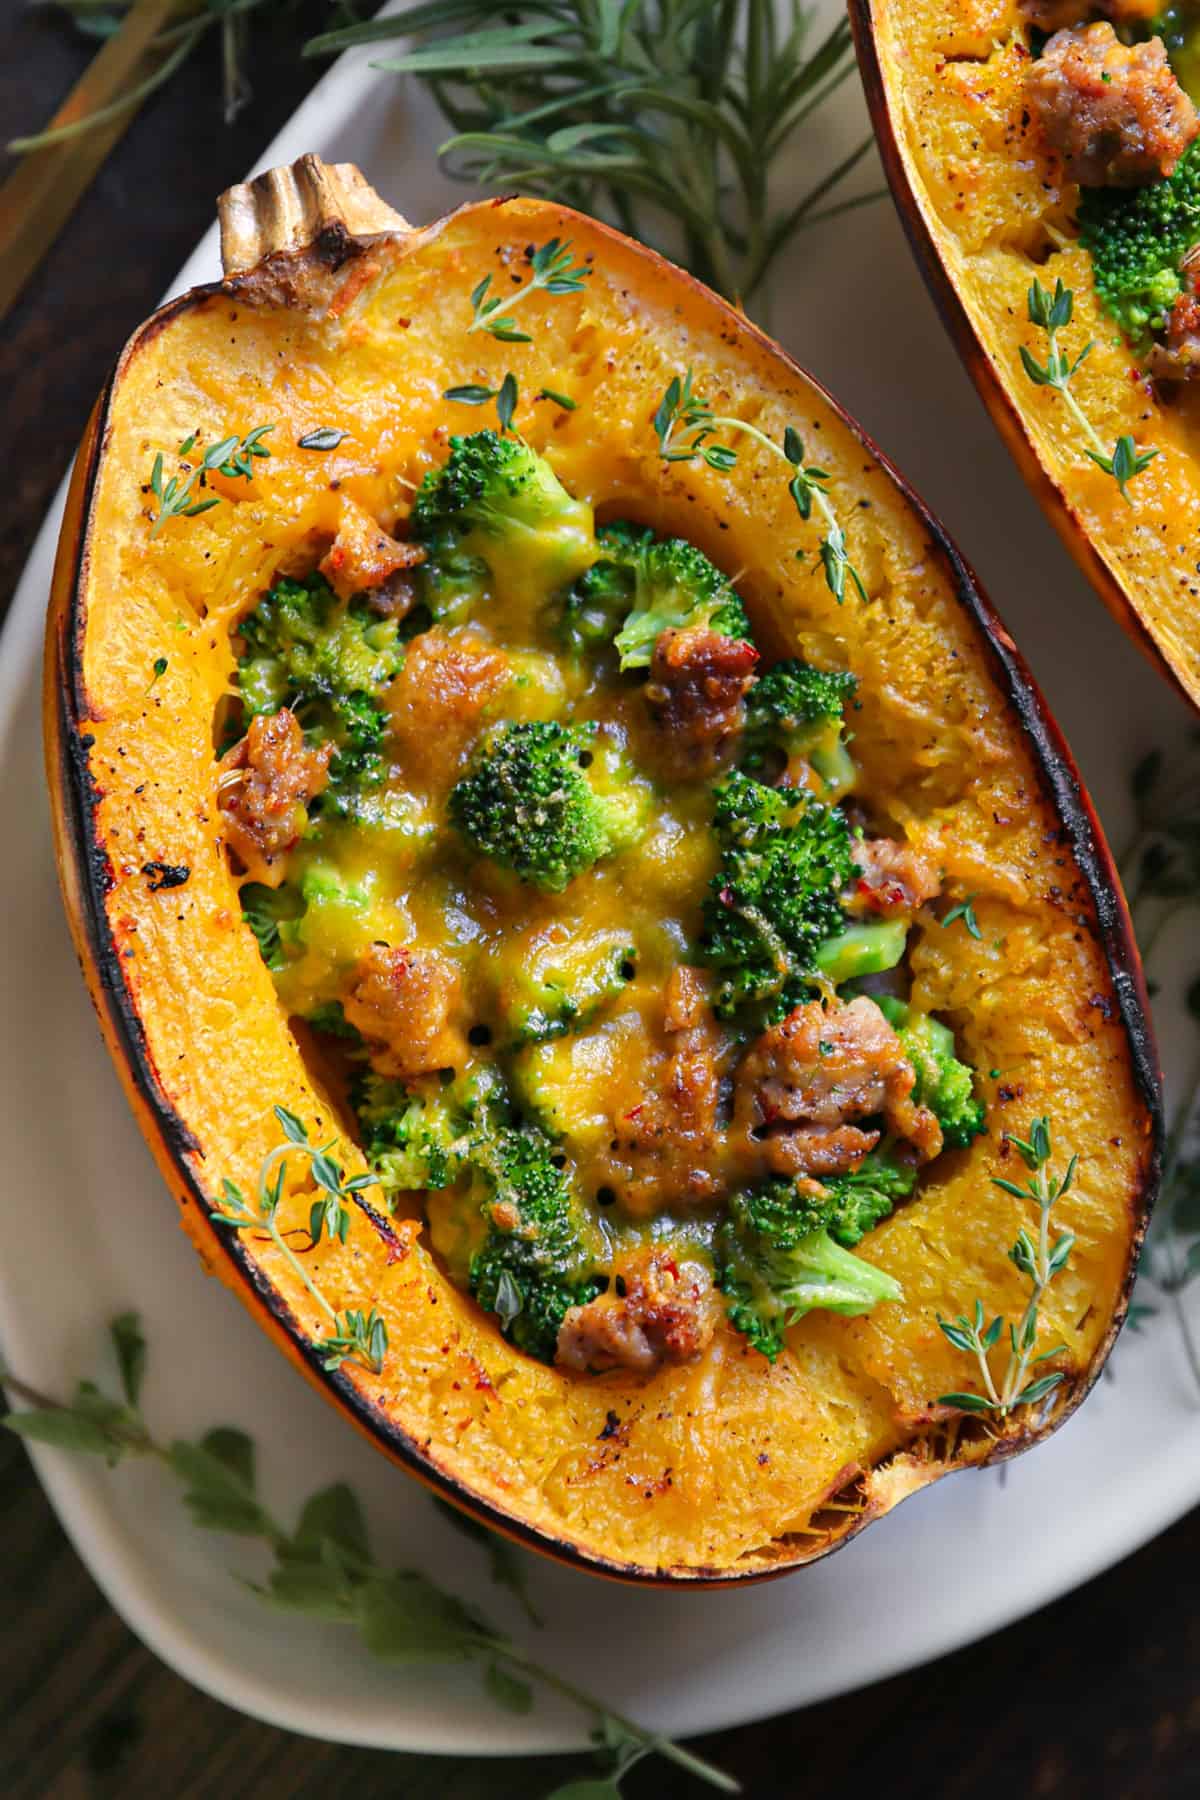 Stuffed Roasted Spaghetti Squash Half with Broccoli, Sausage, and Cheddar Cheese - on a white platter.